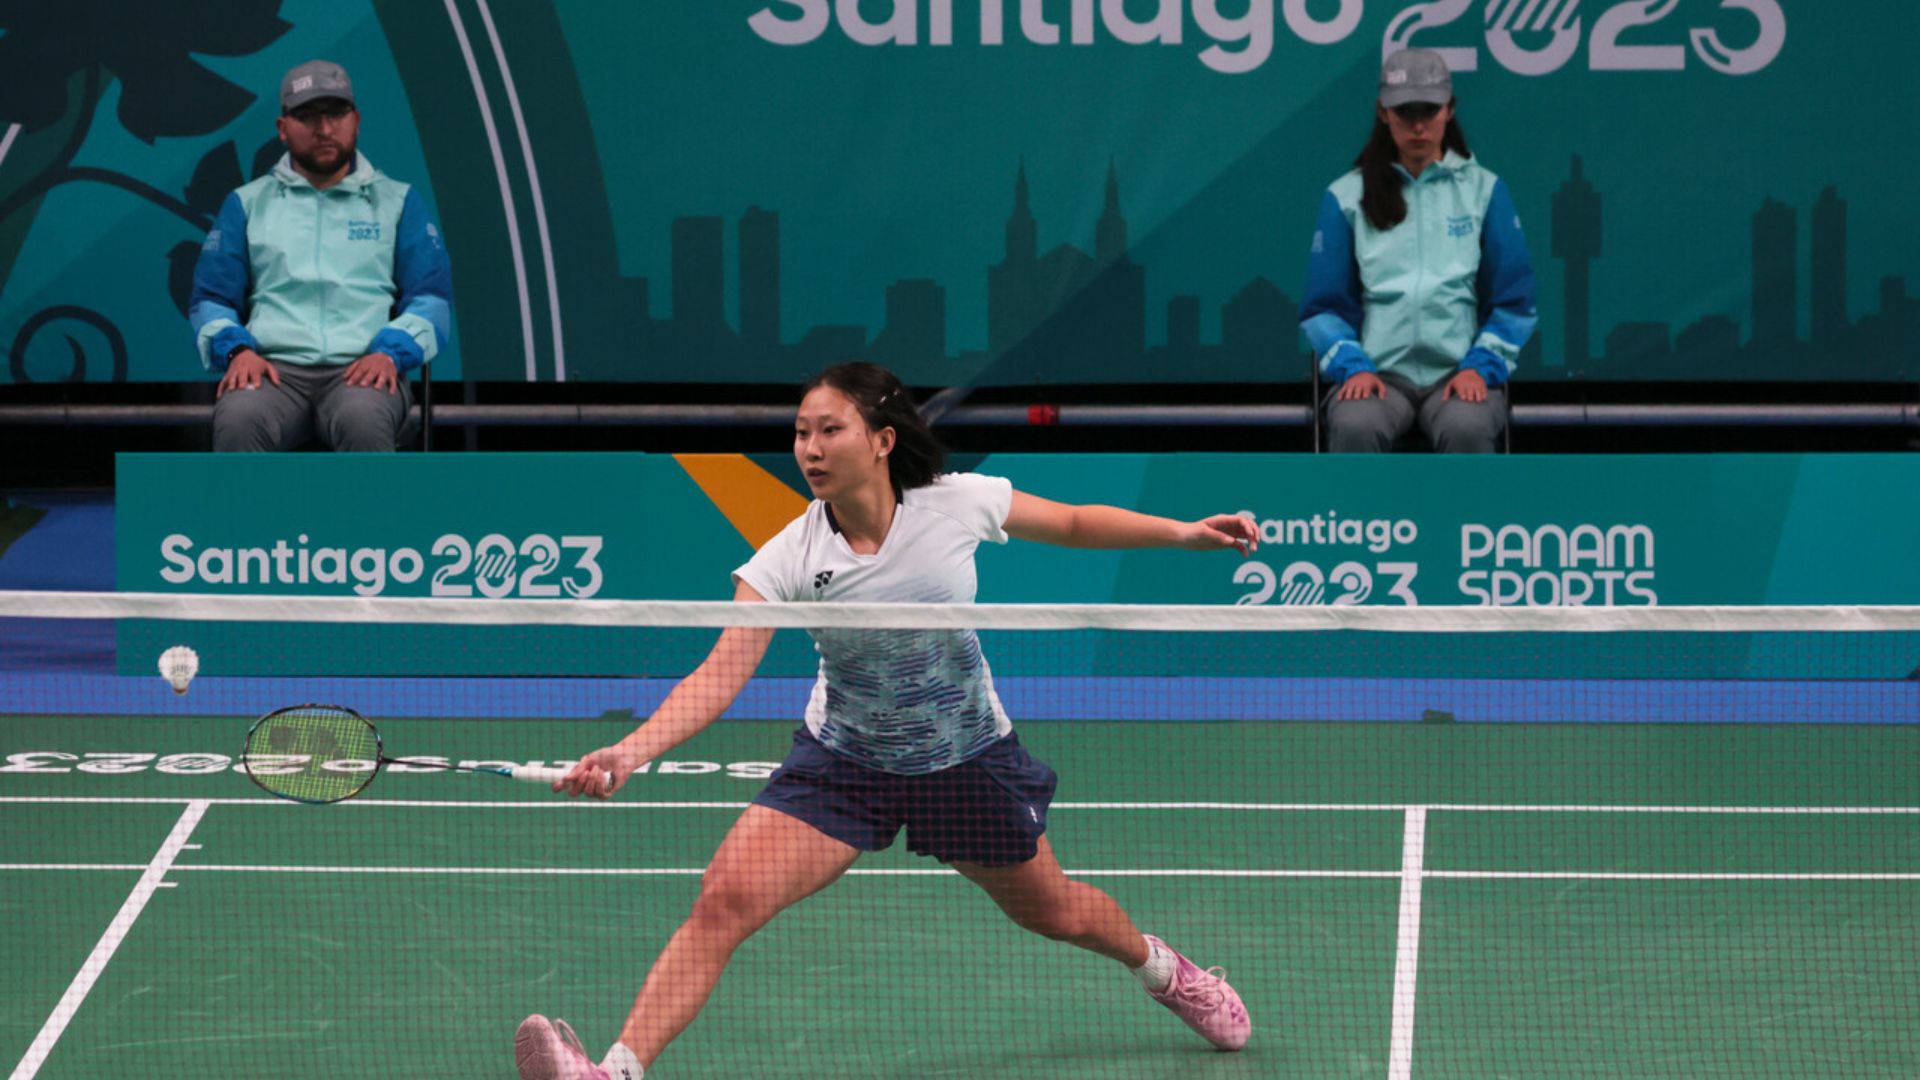 United States and Canada dominate in Tuesday morning's badminton